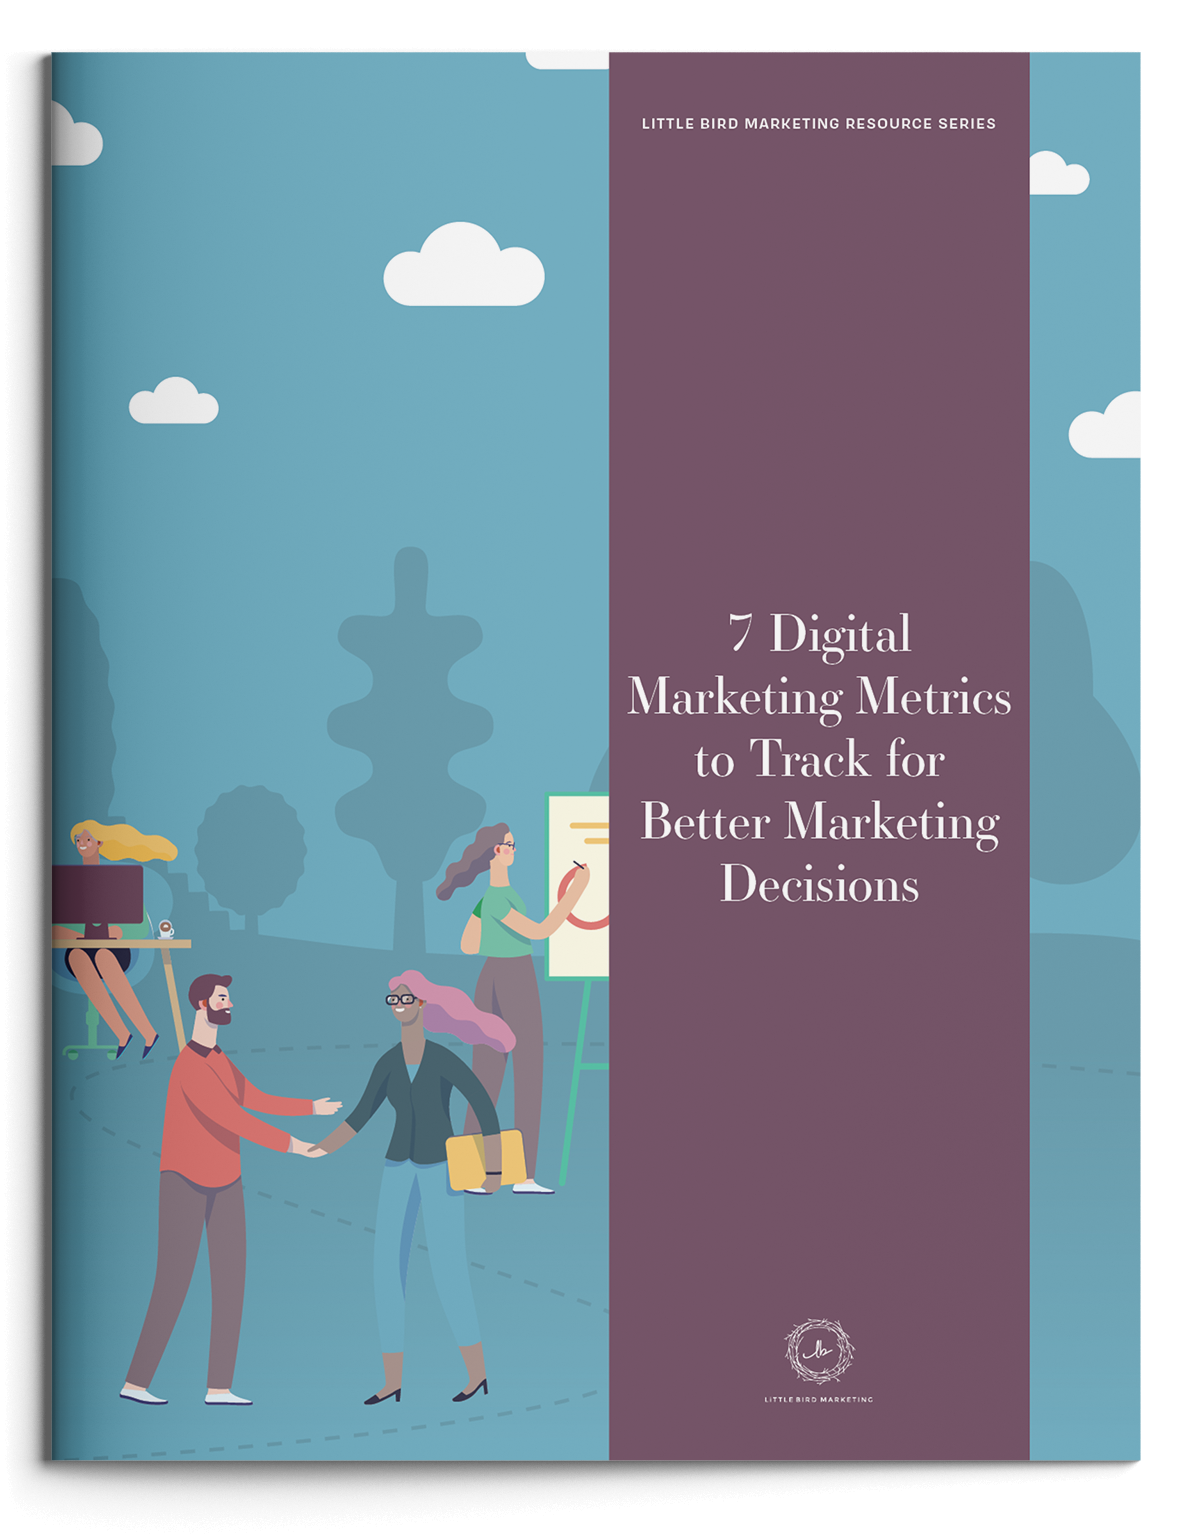 7-marketing-metrics-to-track-for-better-marketing-decisions-booklet-mockup-no-border